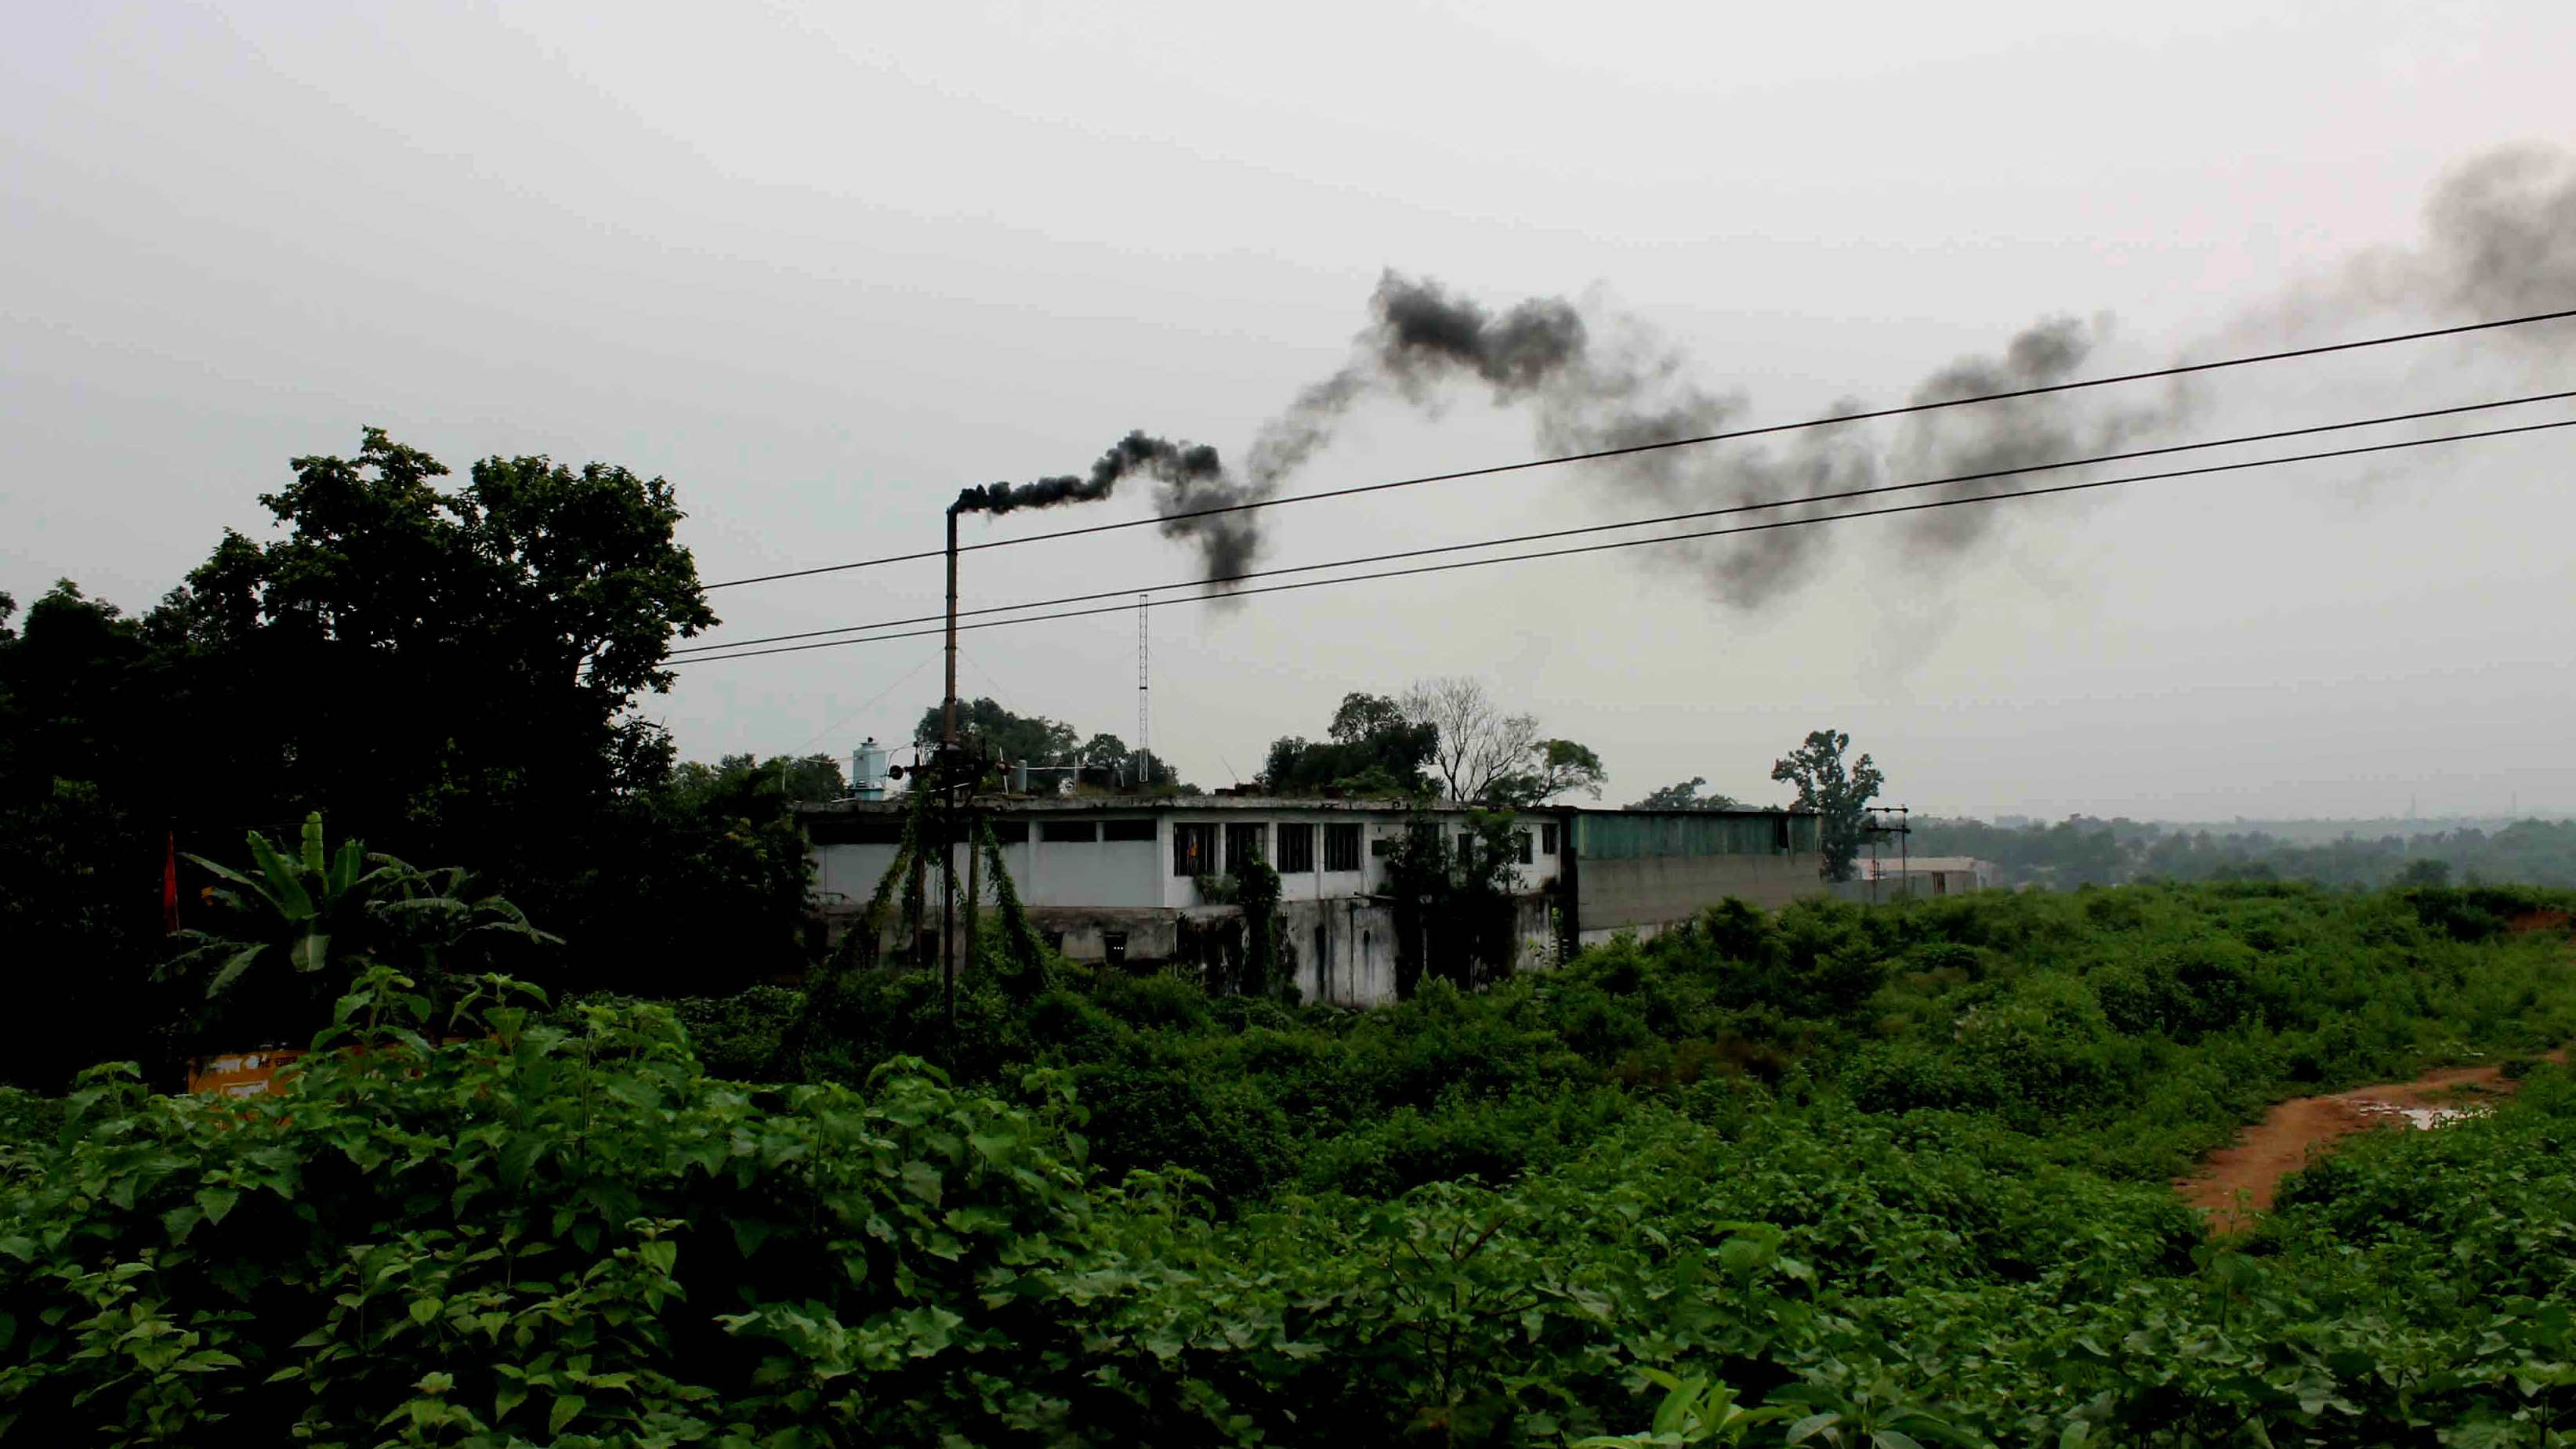 Black smoke billows into the air from an industrial unit at Adityapur.